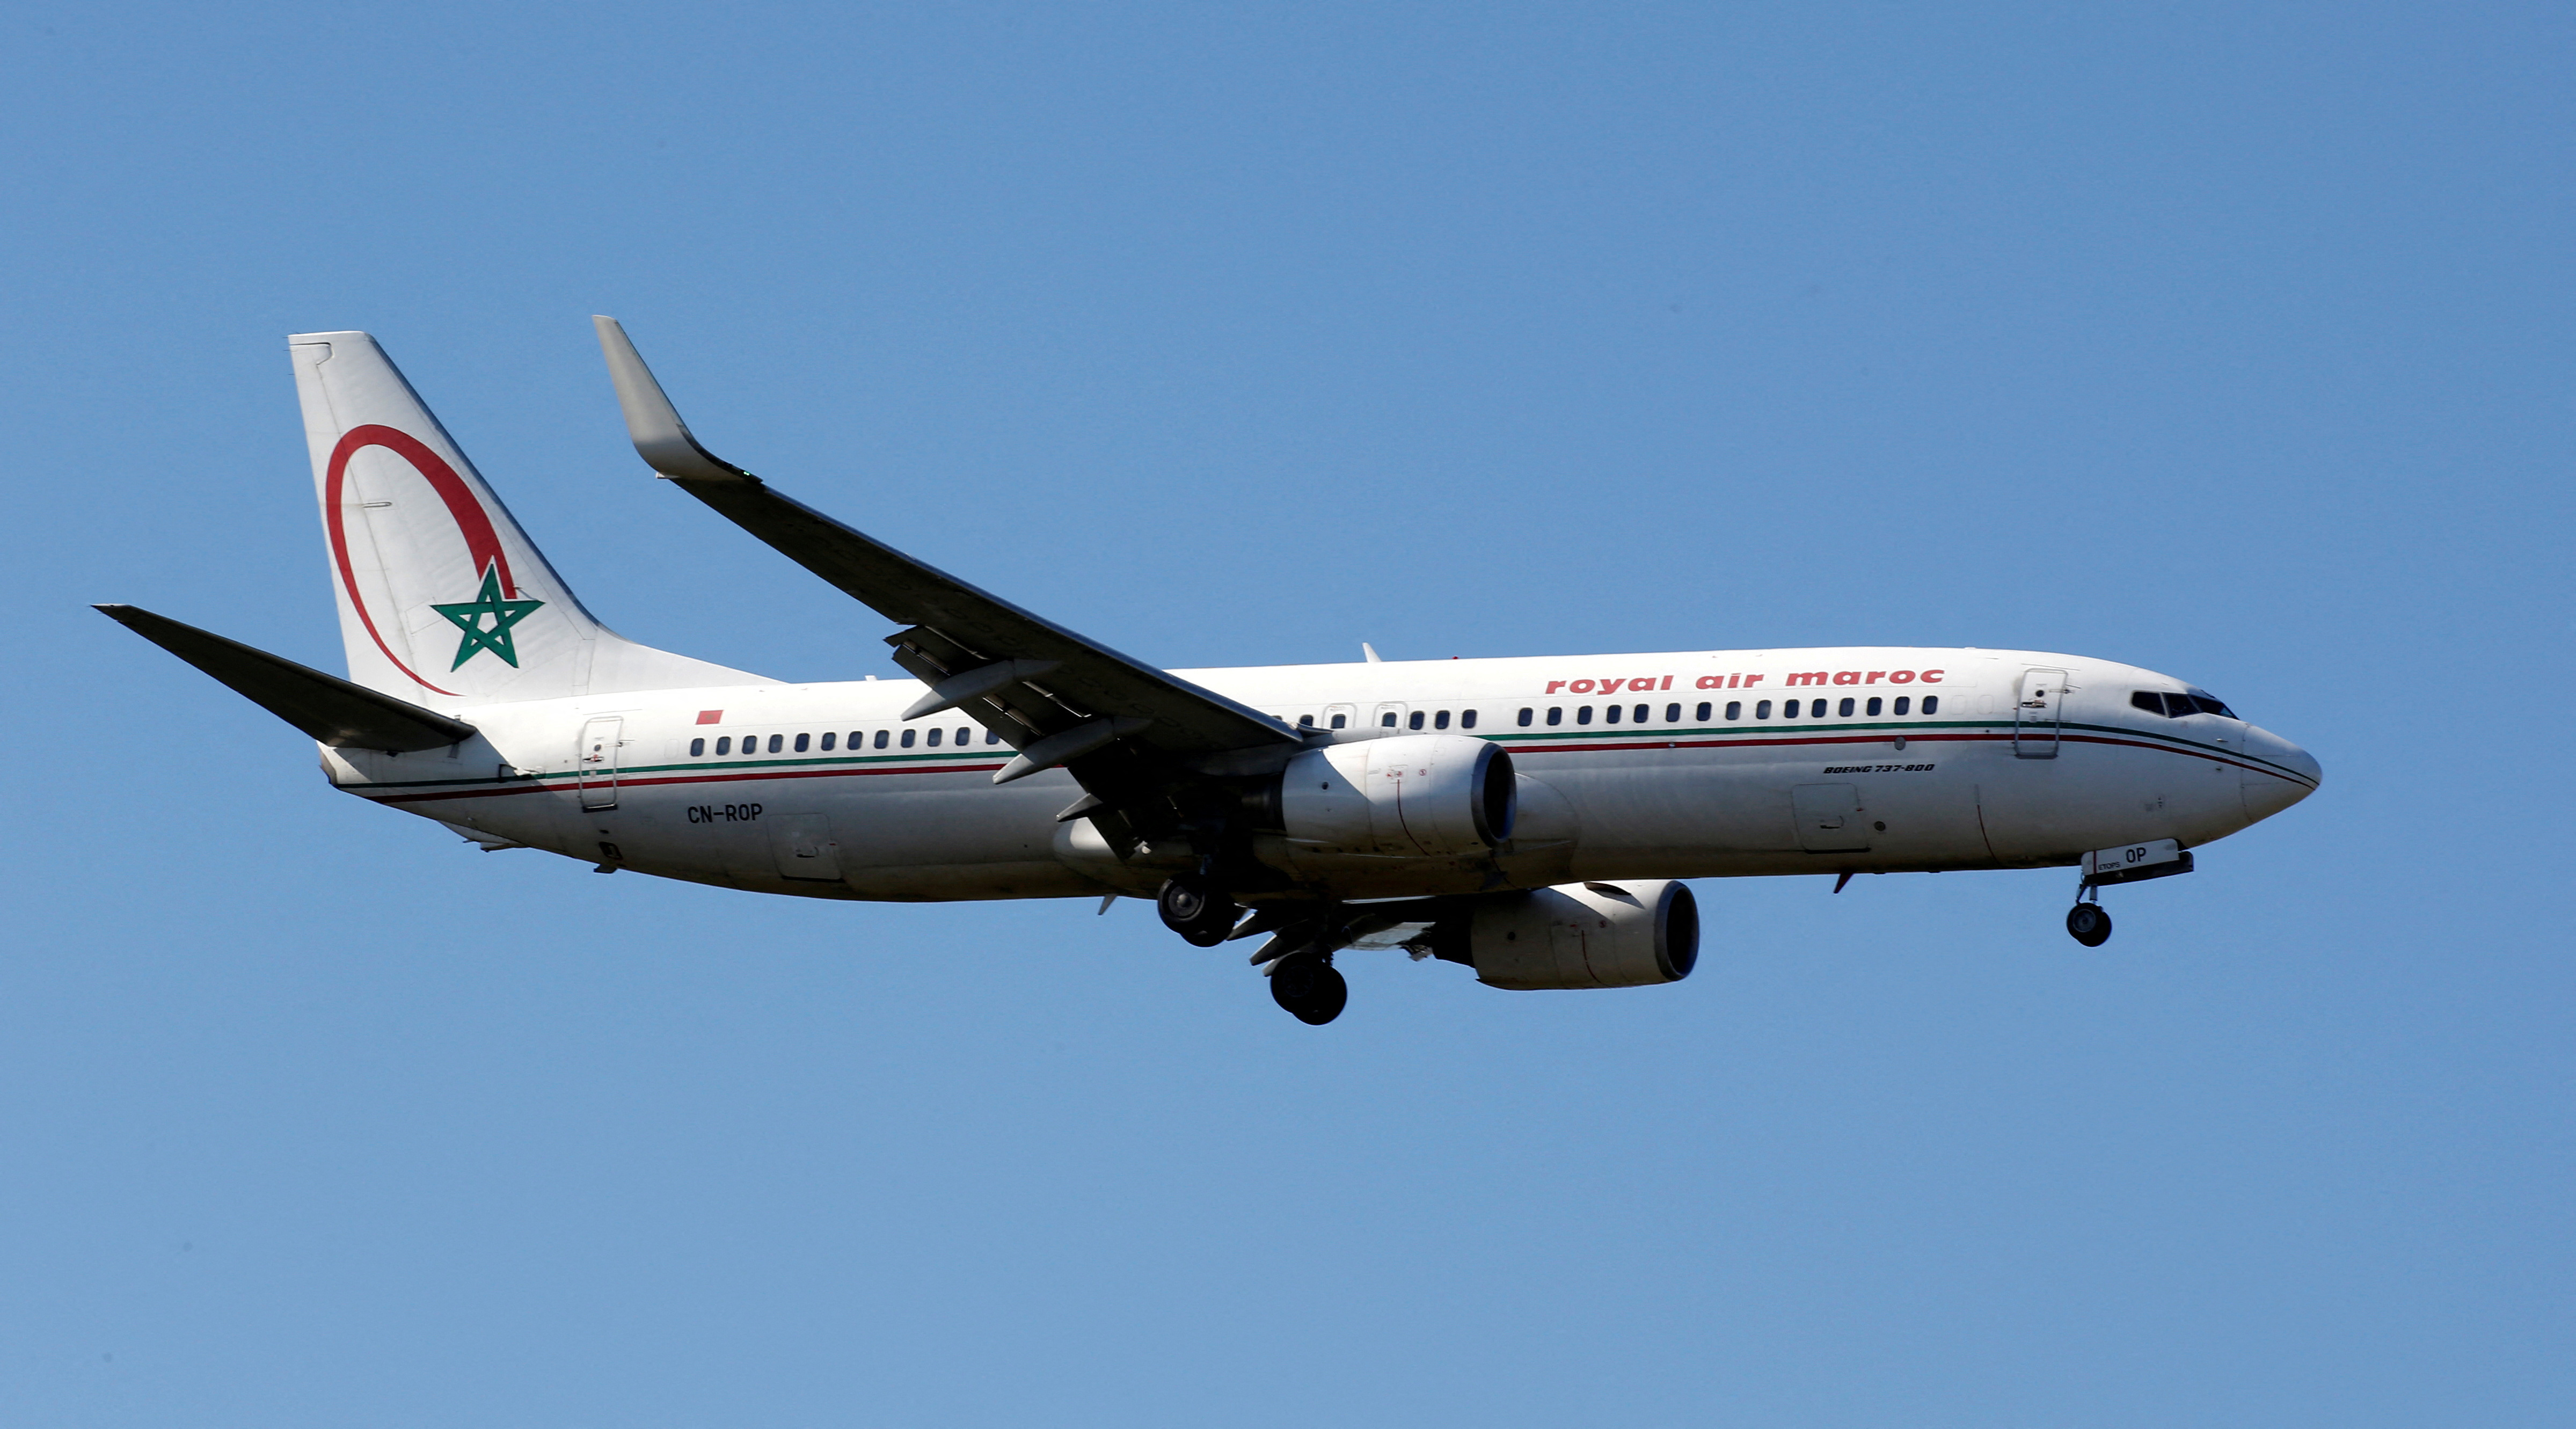 The CN-ROP Royal Air Maroc Boeing 737 makes its final approach for landing at Toulouse-Blagnac airport